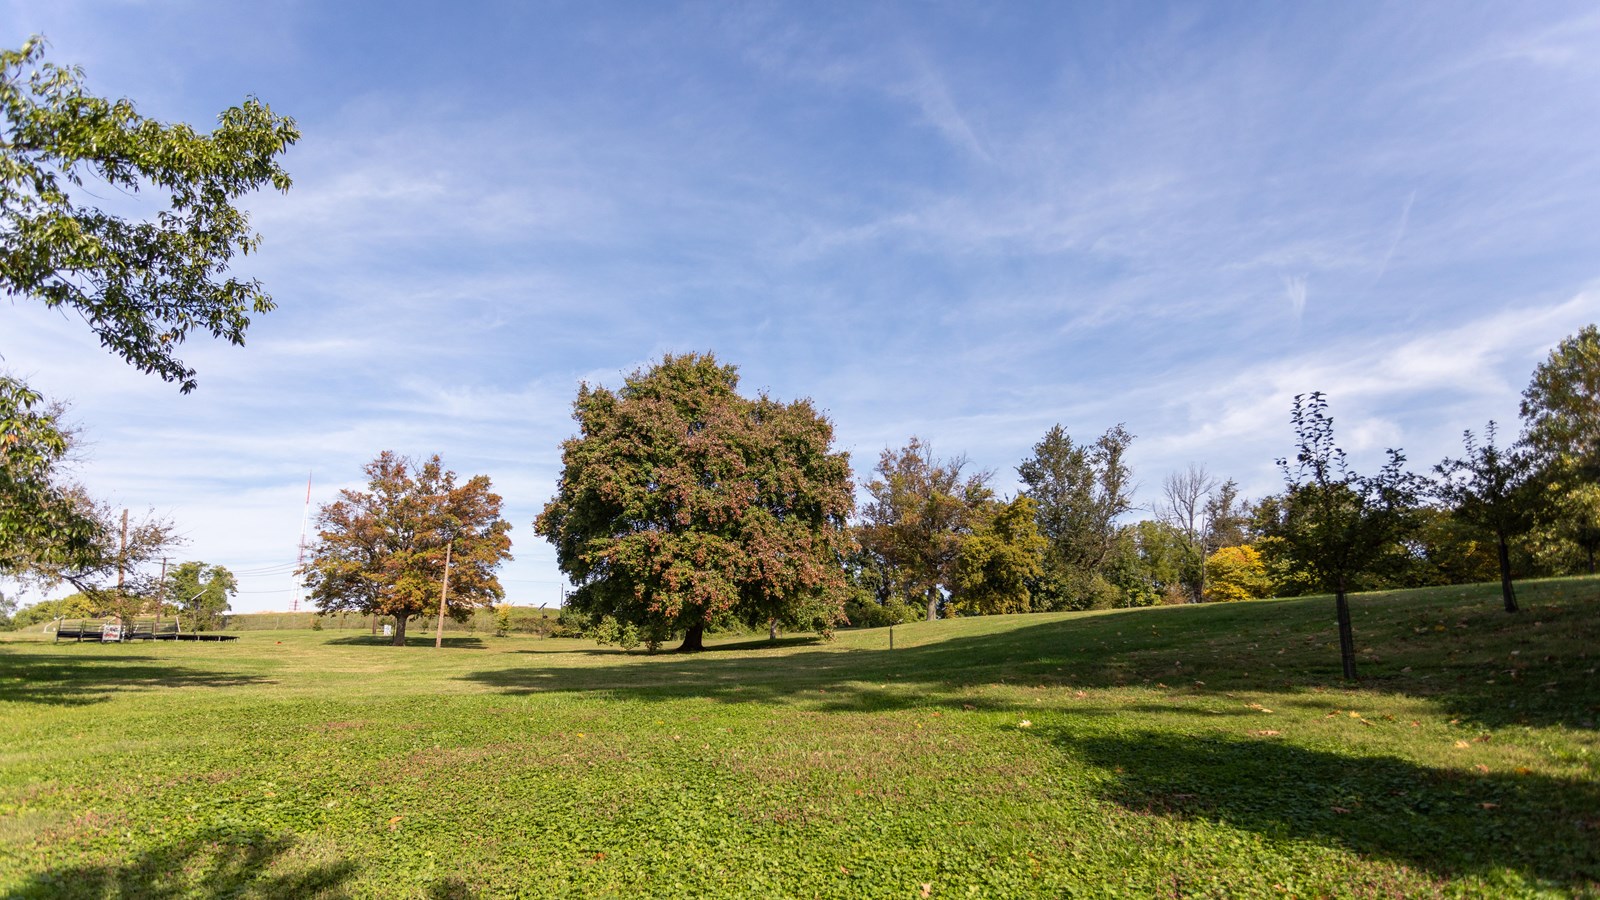 A large grassy field surrounded by trees. 